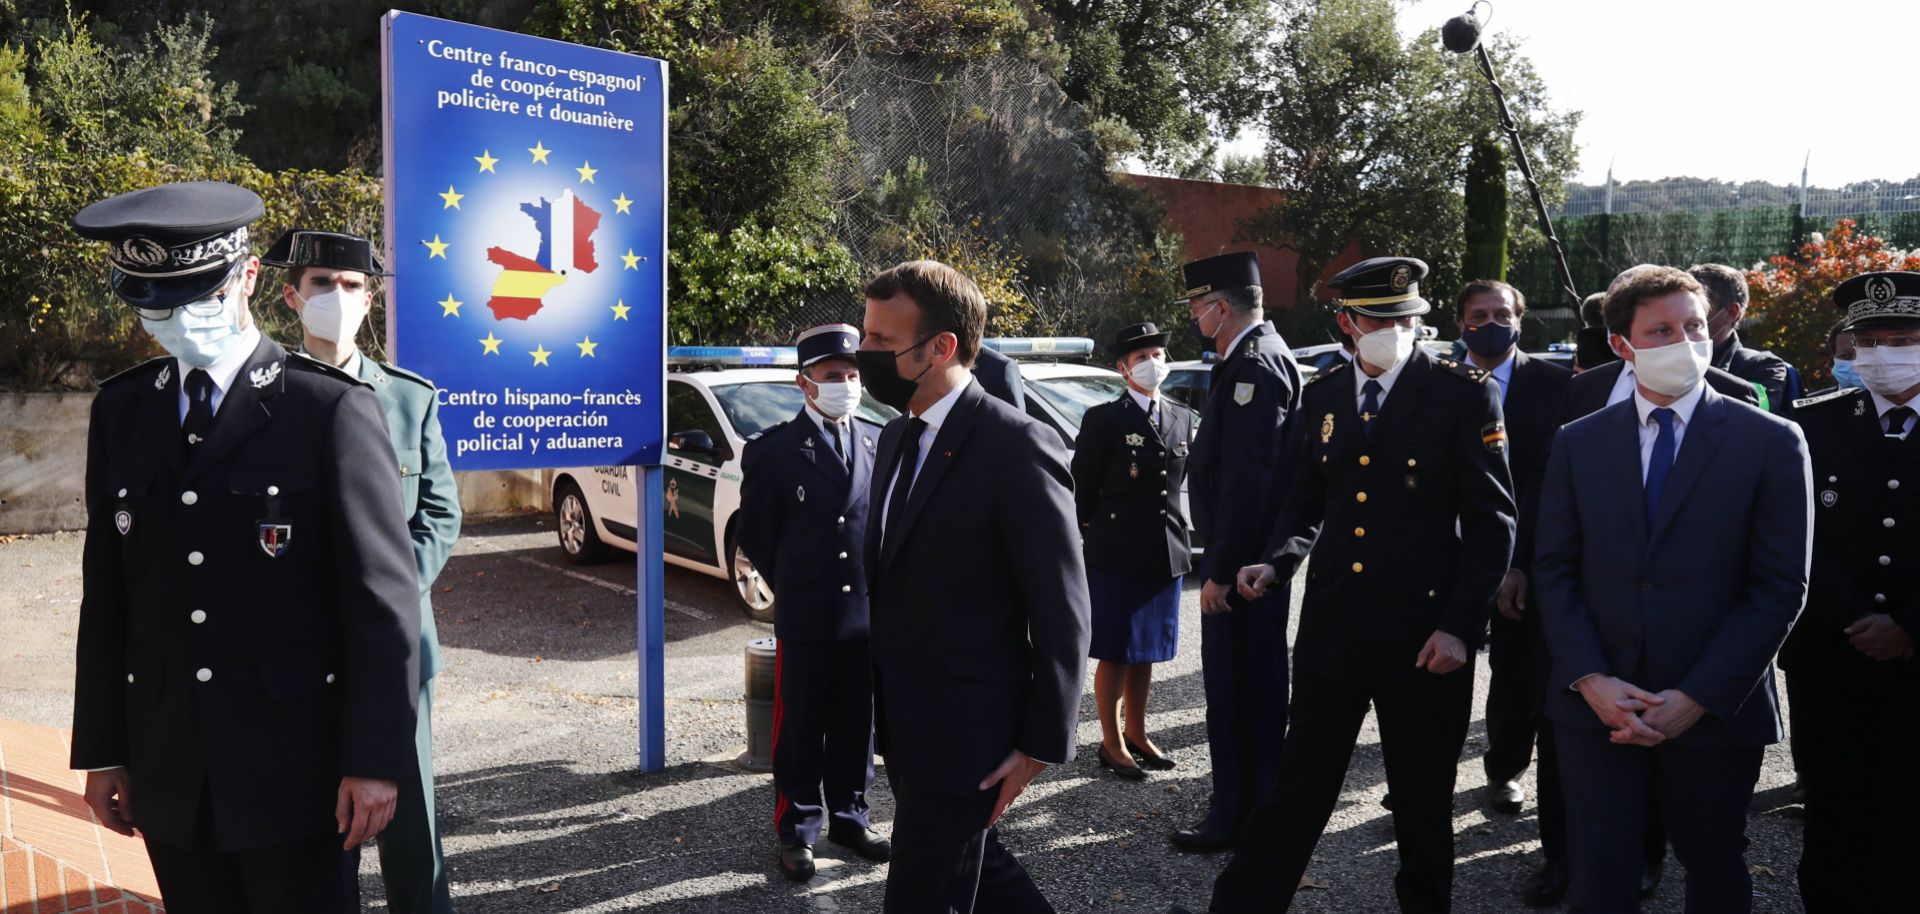 French President Emmanuel Macron (center) arrives at the Spanish border in Le Perthus, France, after he announced that the number of border guards would be doubled to 4,800 from 2,400 "because of the worsening of the threat" from terrorism on Nov. 5, 2020.